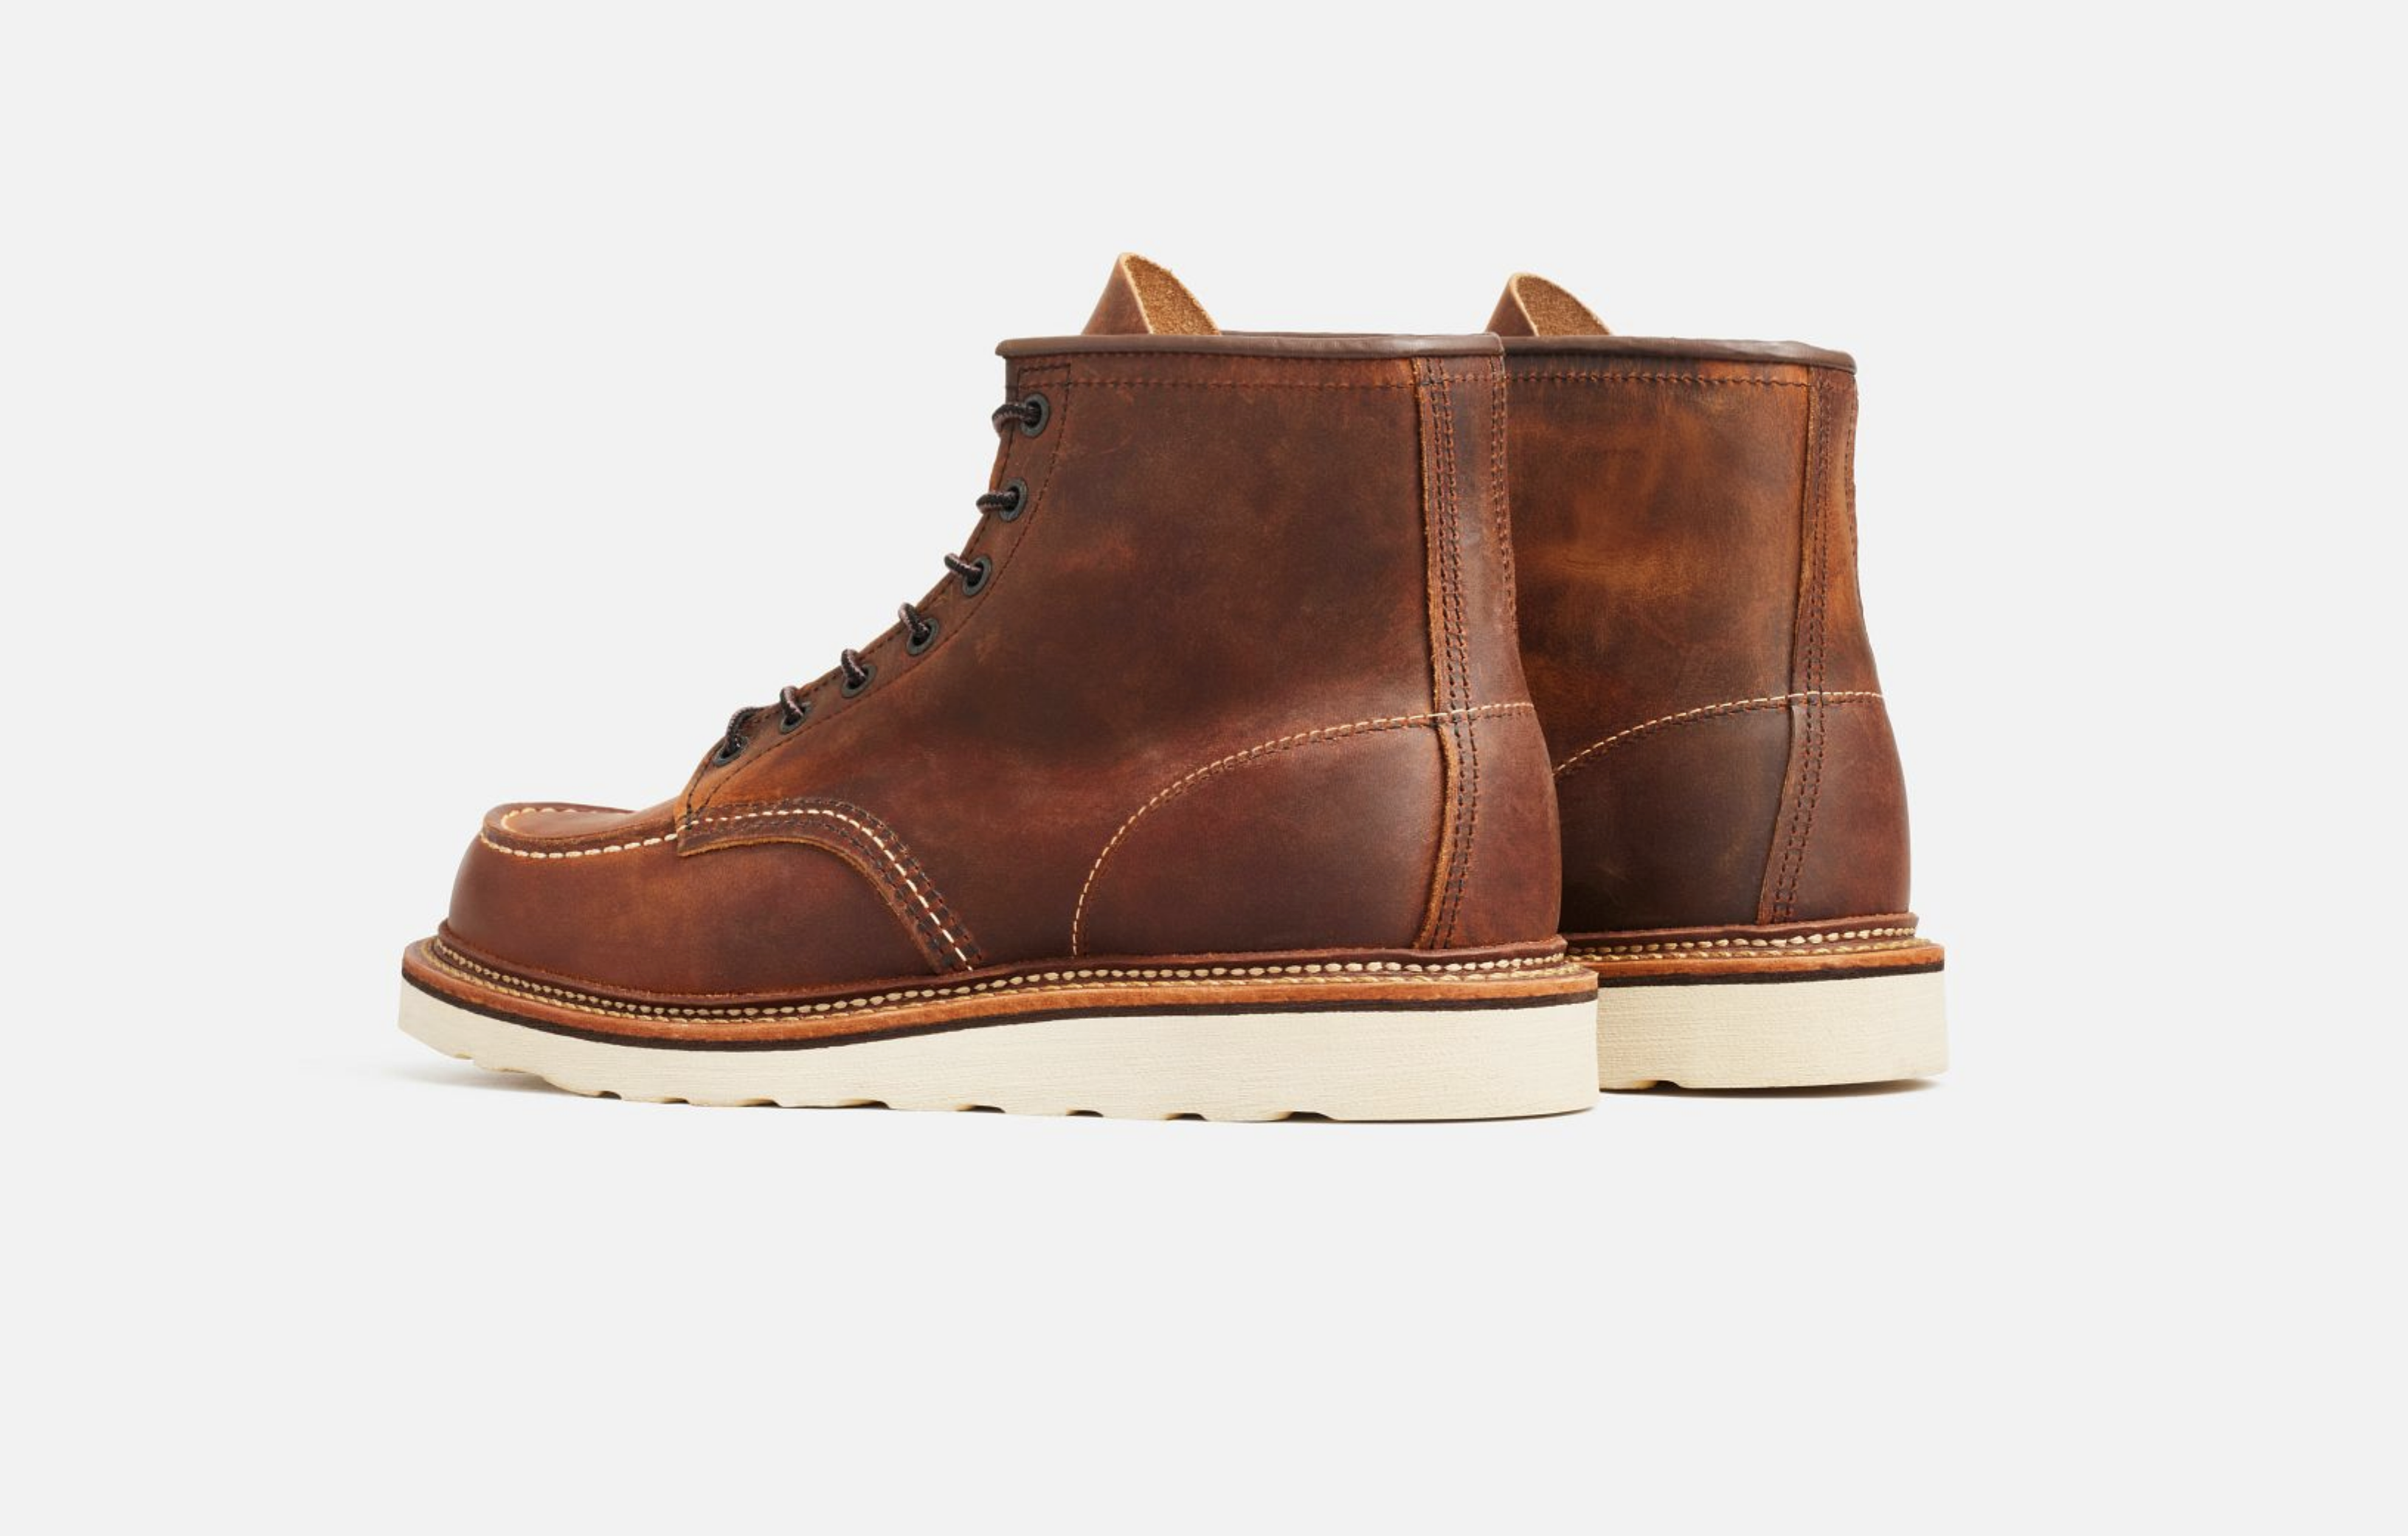 No. 1907 - Red Wing Heritage Classic Moc Style in Copper Rough & Tough  Leather